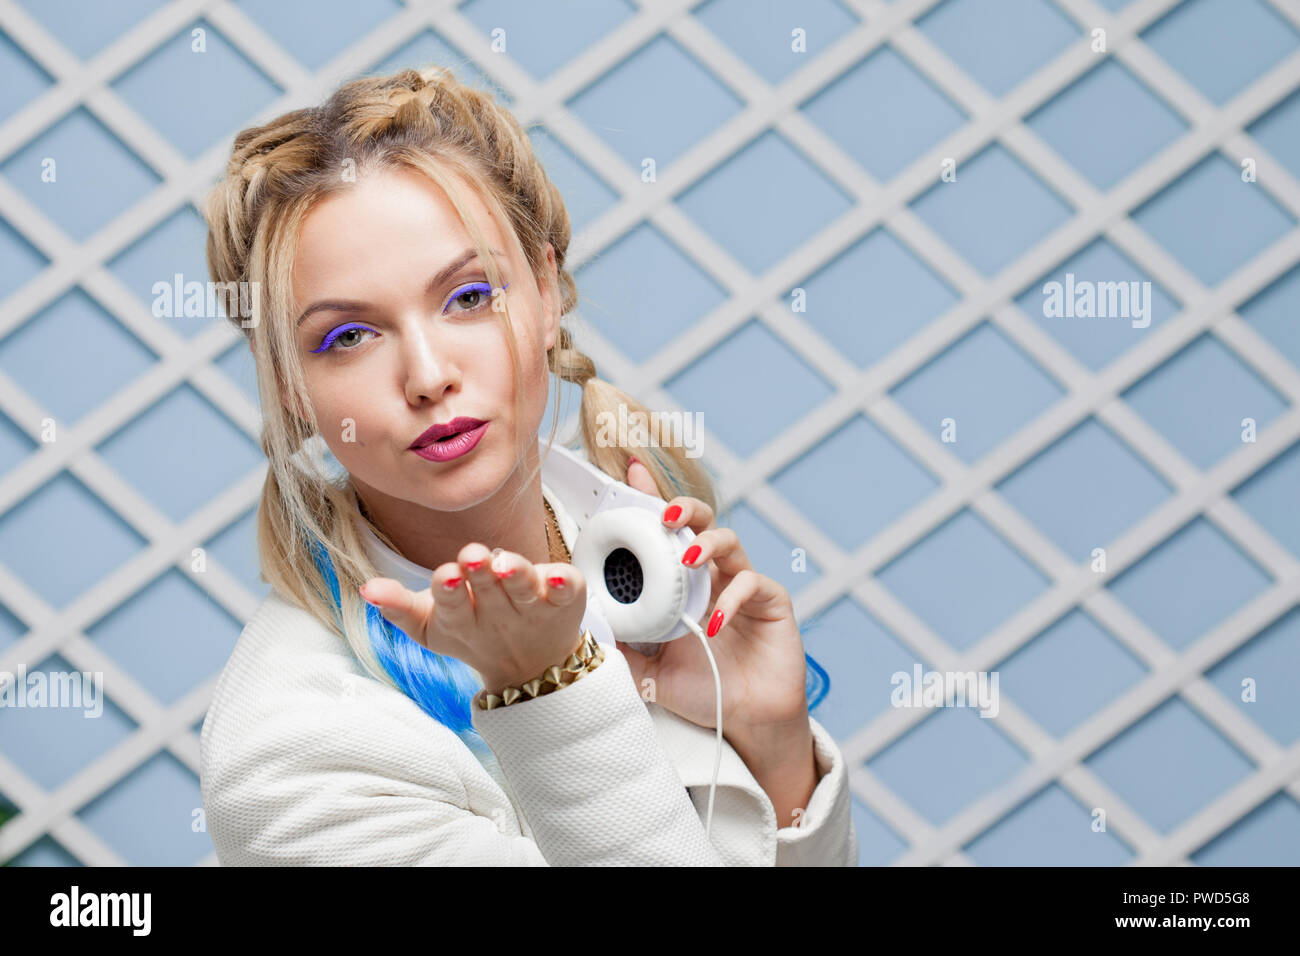 Sends a kiss. Enjoy the music. Girl with colored hair and big headphones. Listening music Stock Photo